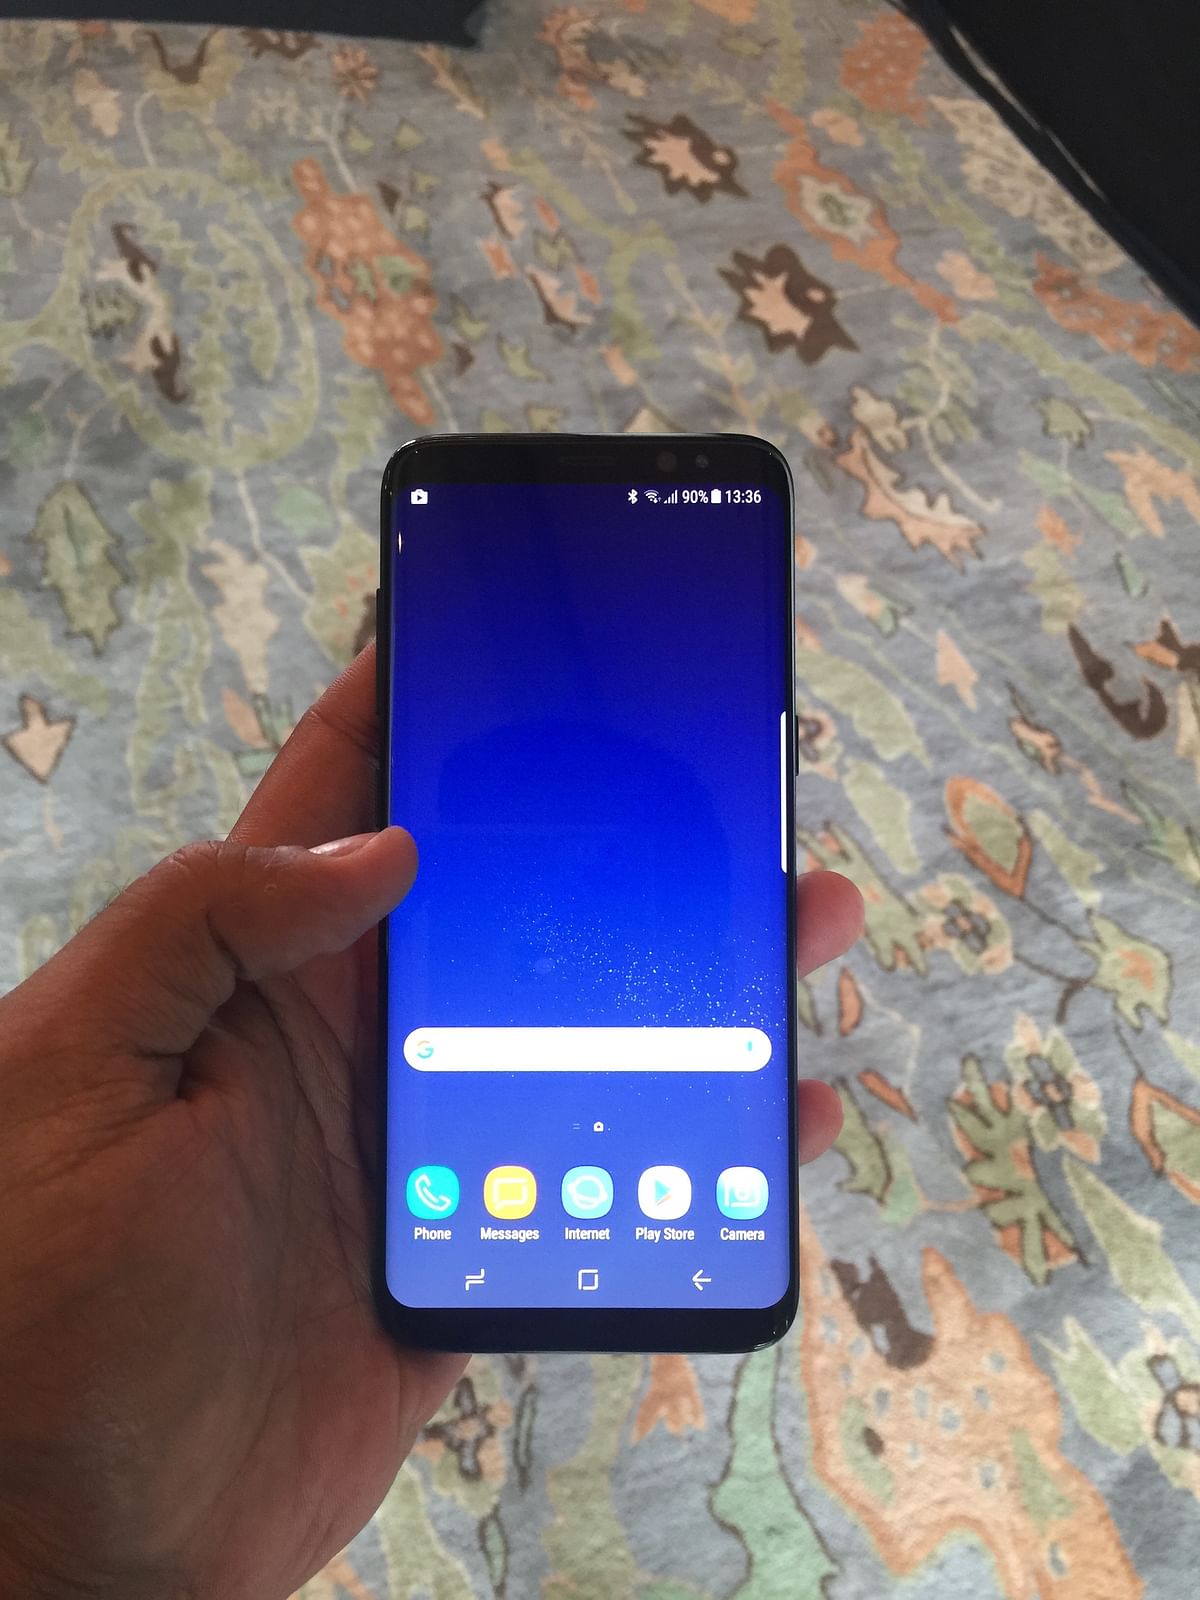 Samsung S8 and S8+: First impressions and specifications.